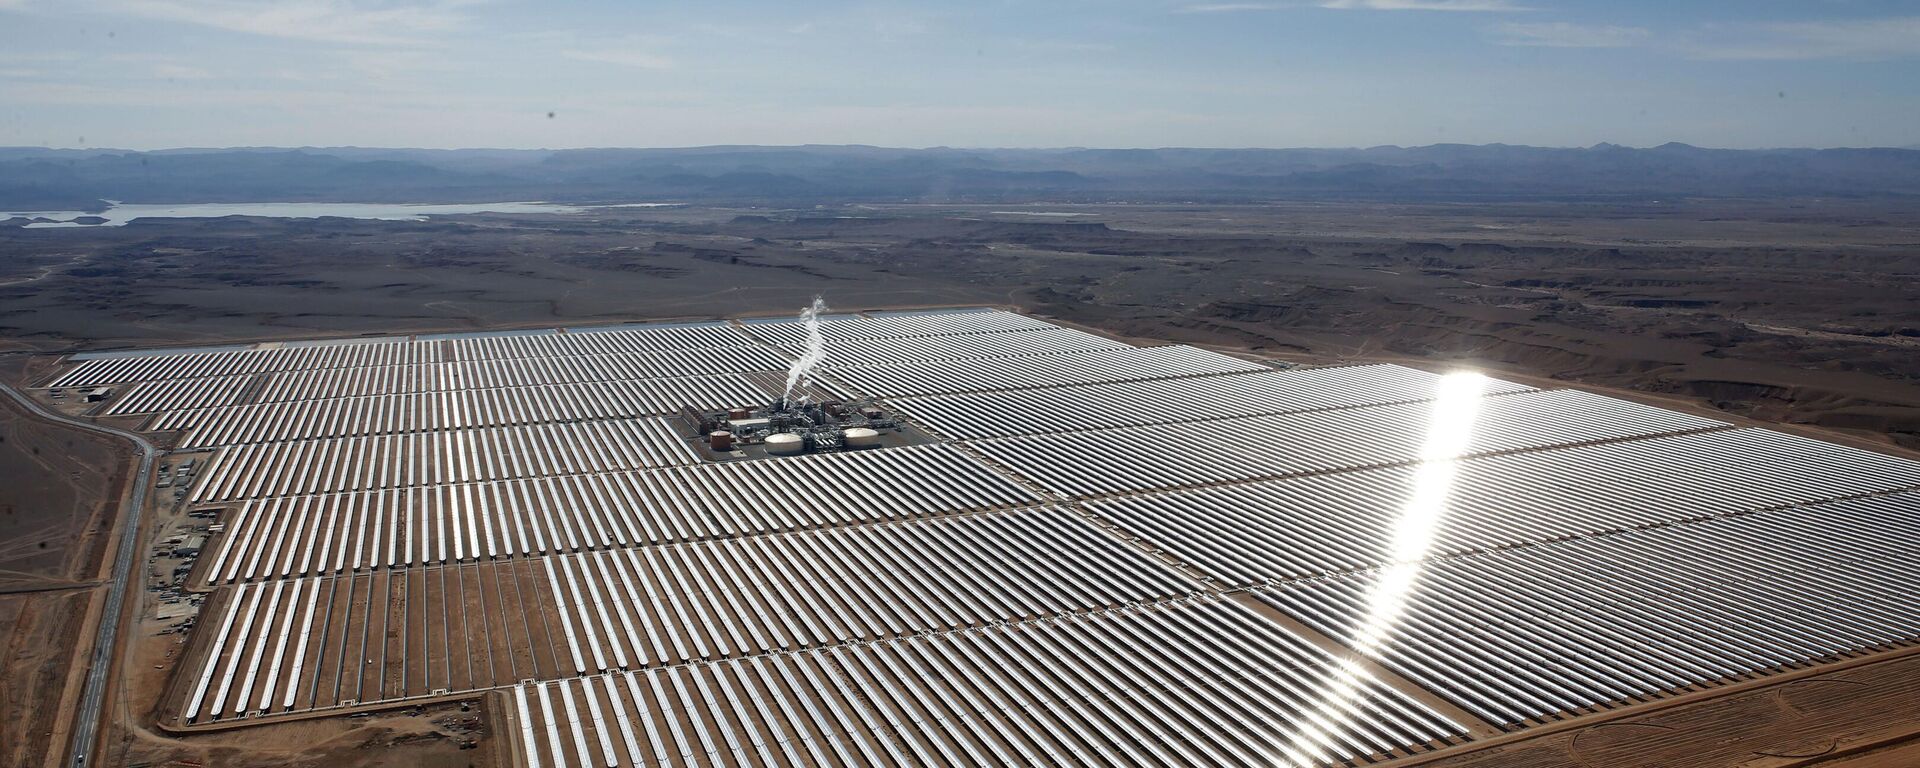  An aerial view of a solar power plant in Ouarzazate, central Morocco on Feb.4, 2016. Renewable energy's potential across the African continent remains largely untapped, according to a new report in April 2022 by the United Nation's Intergovernmental Panel on Climate Change.  - Sputnik International, 1920, 07.02.2023